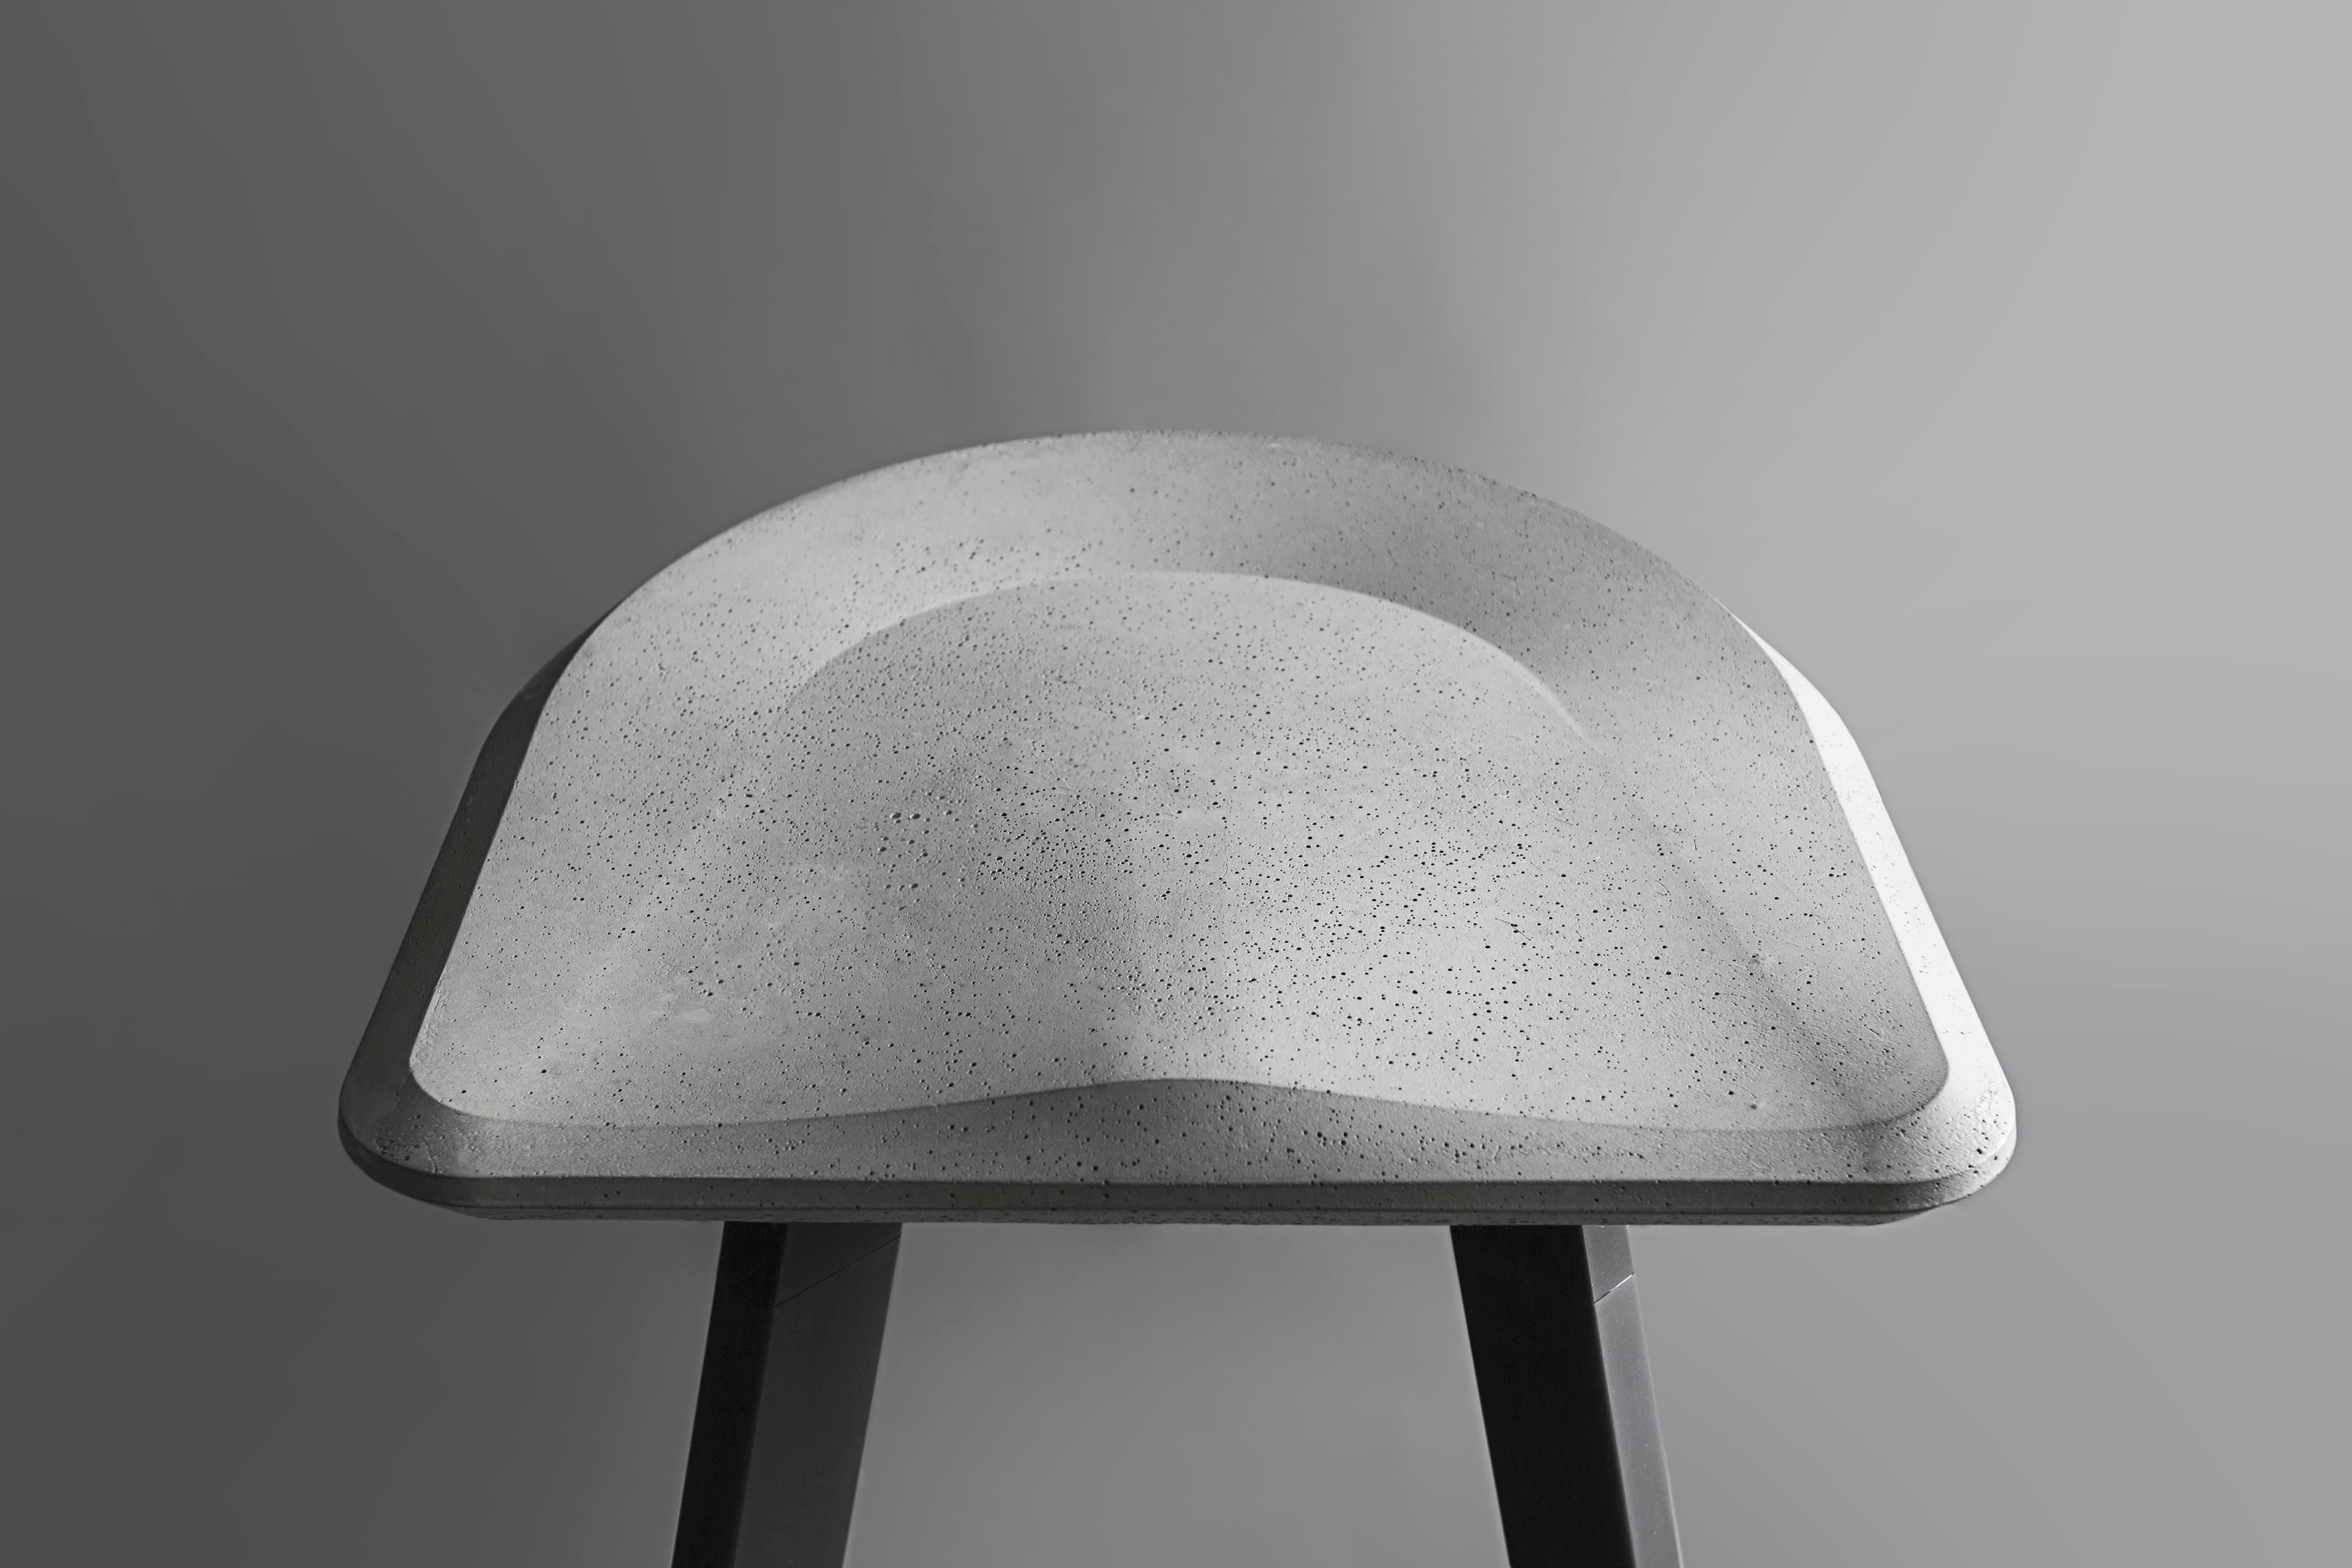 'A' is a bar stool made of concrete and aluminium
by Bentu Design

Dimensions: H 76.5cm x 46.5 x 46.5 cm


Bentu Design's furniture derives its uniqueness from the simplicity of its forms and its materials. Designed and manufactured by the designers